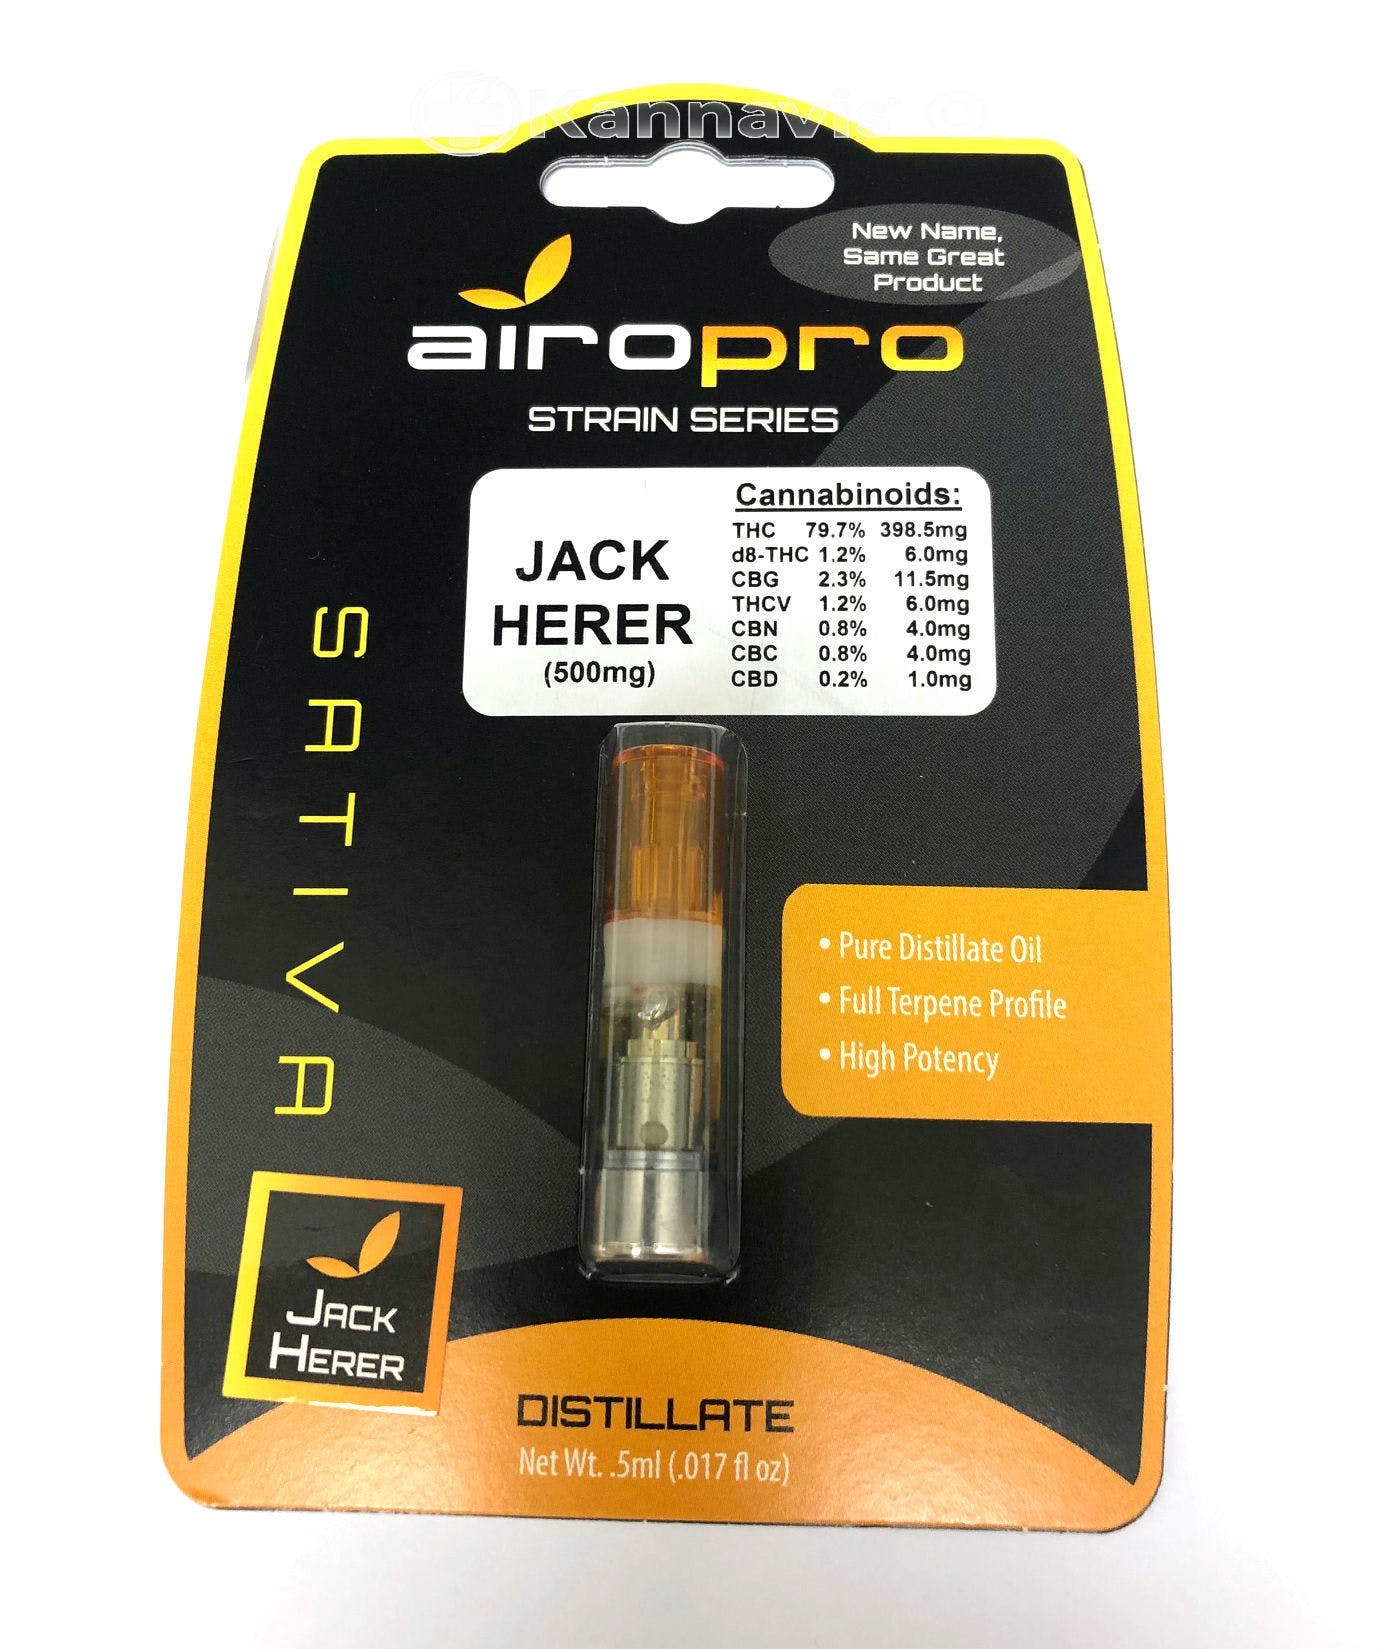 concentrate-airopro-strain-series-jack-herer-distillate-cartridge